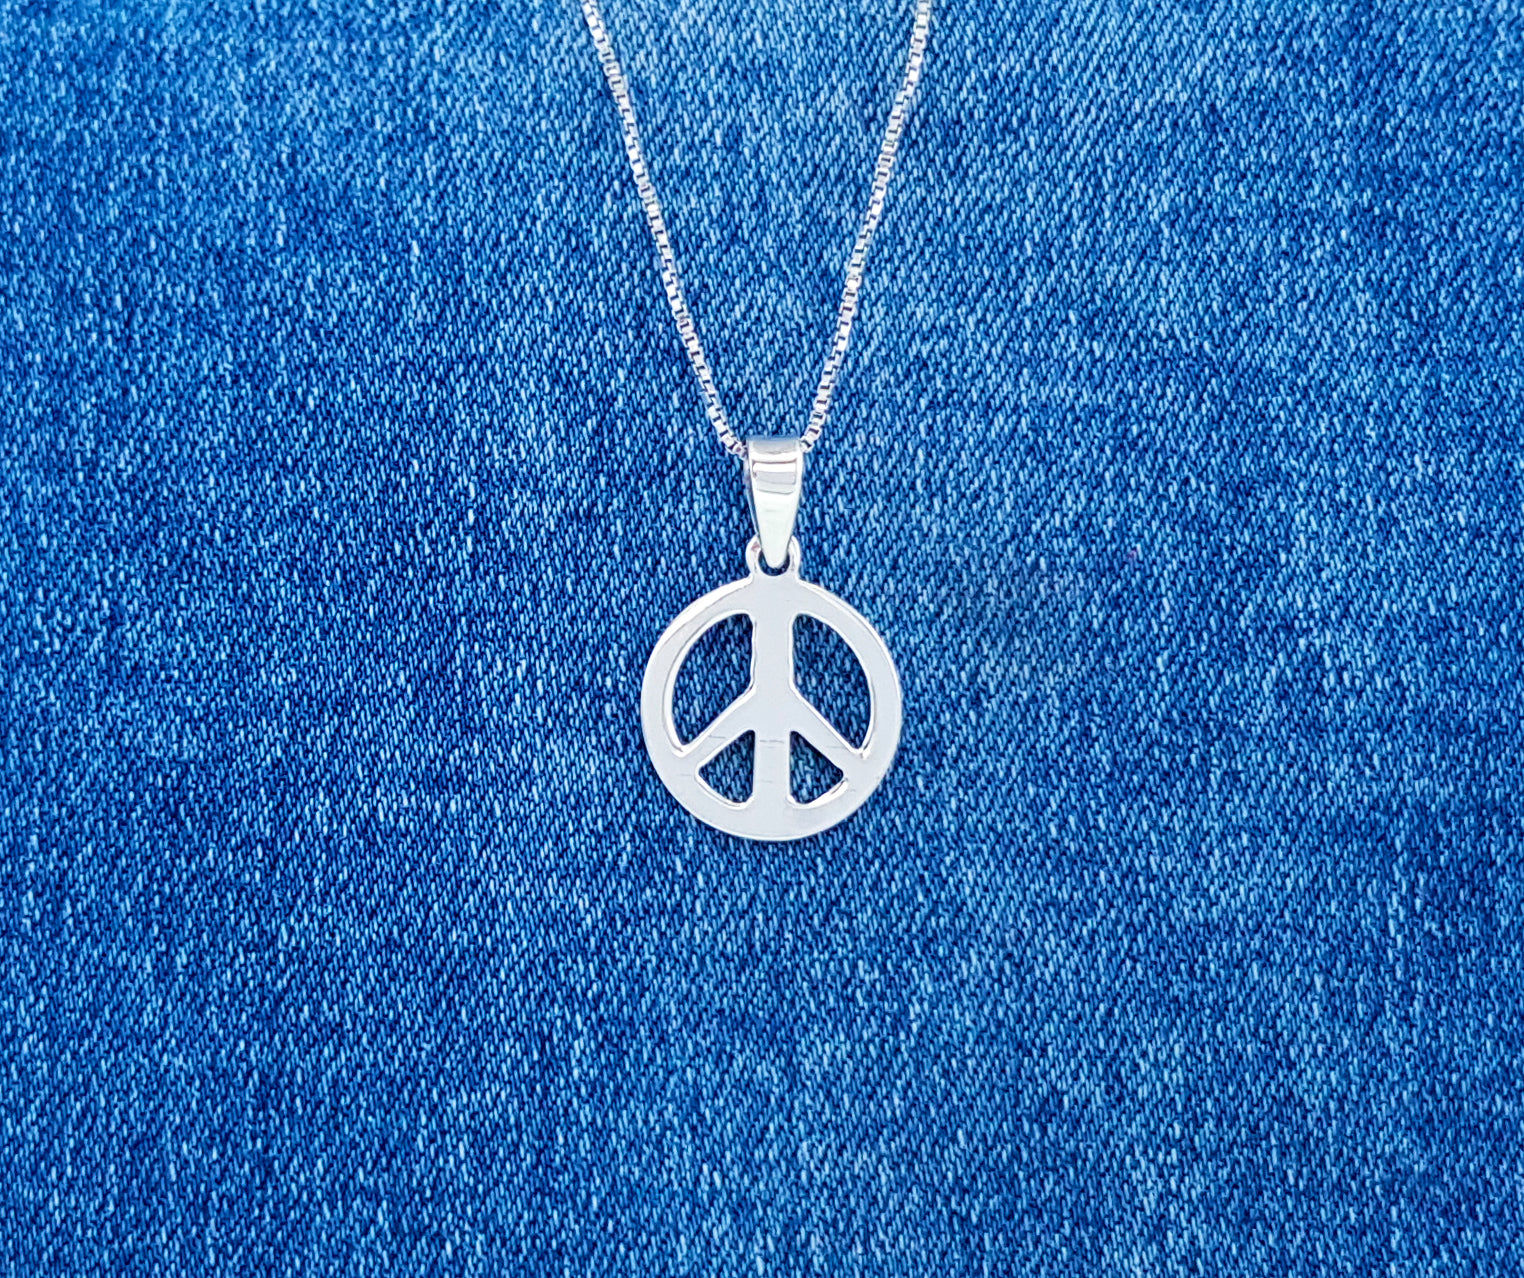 Sterling Silver Peace Sign Pendant or Charm